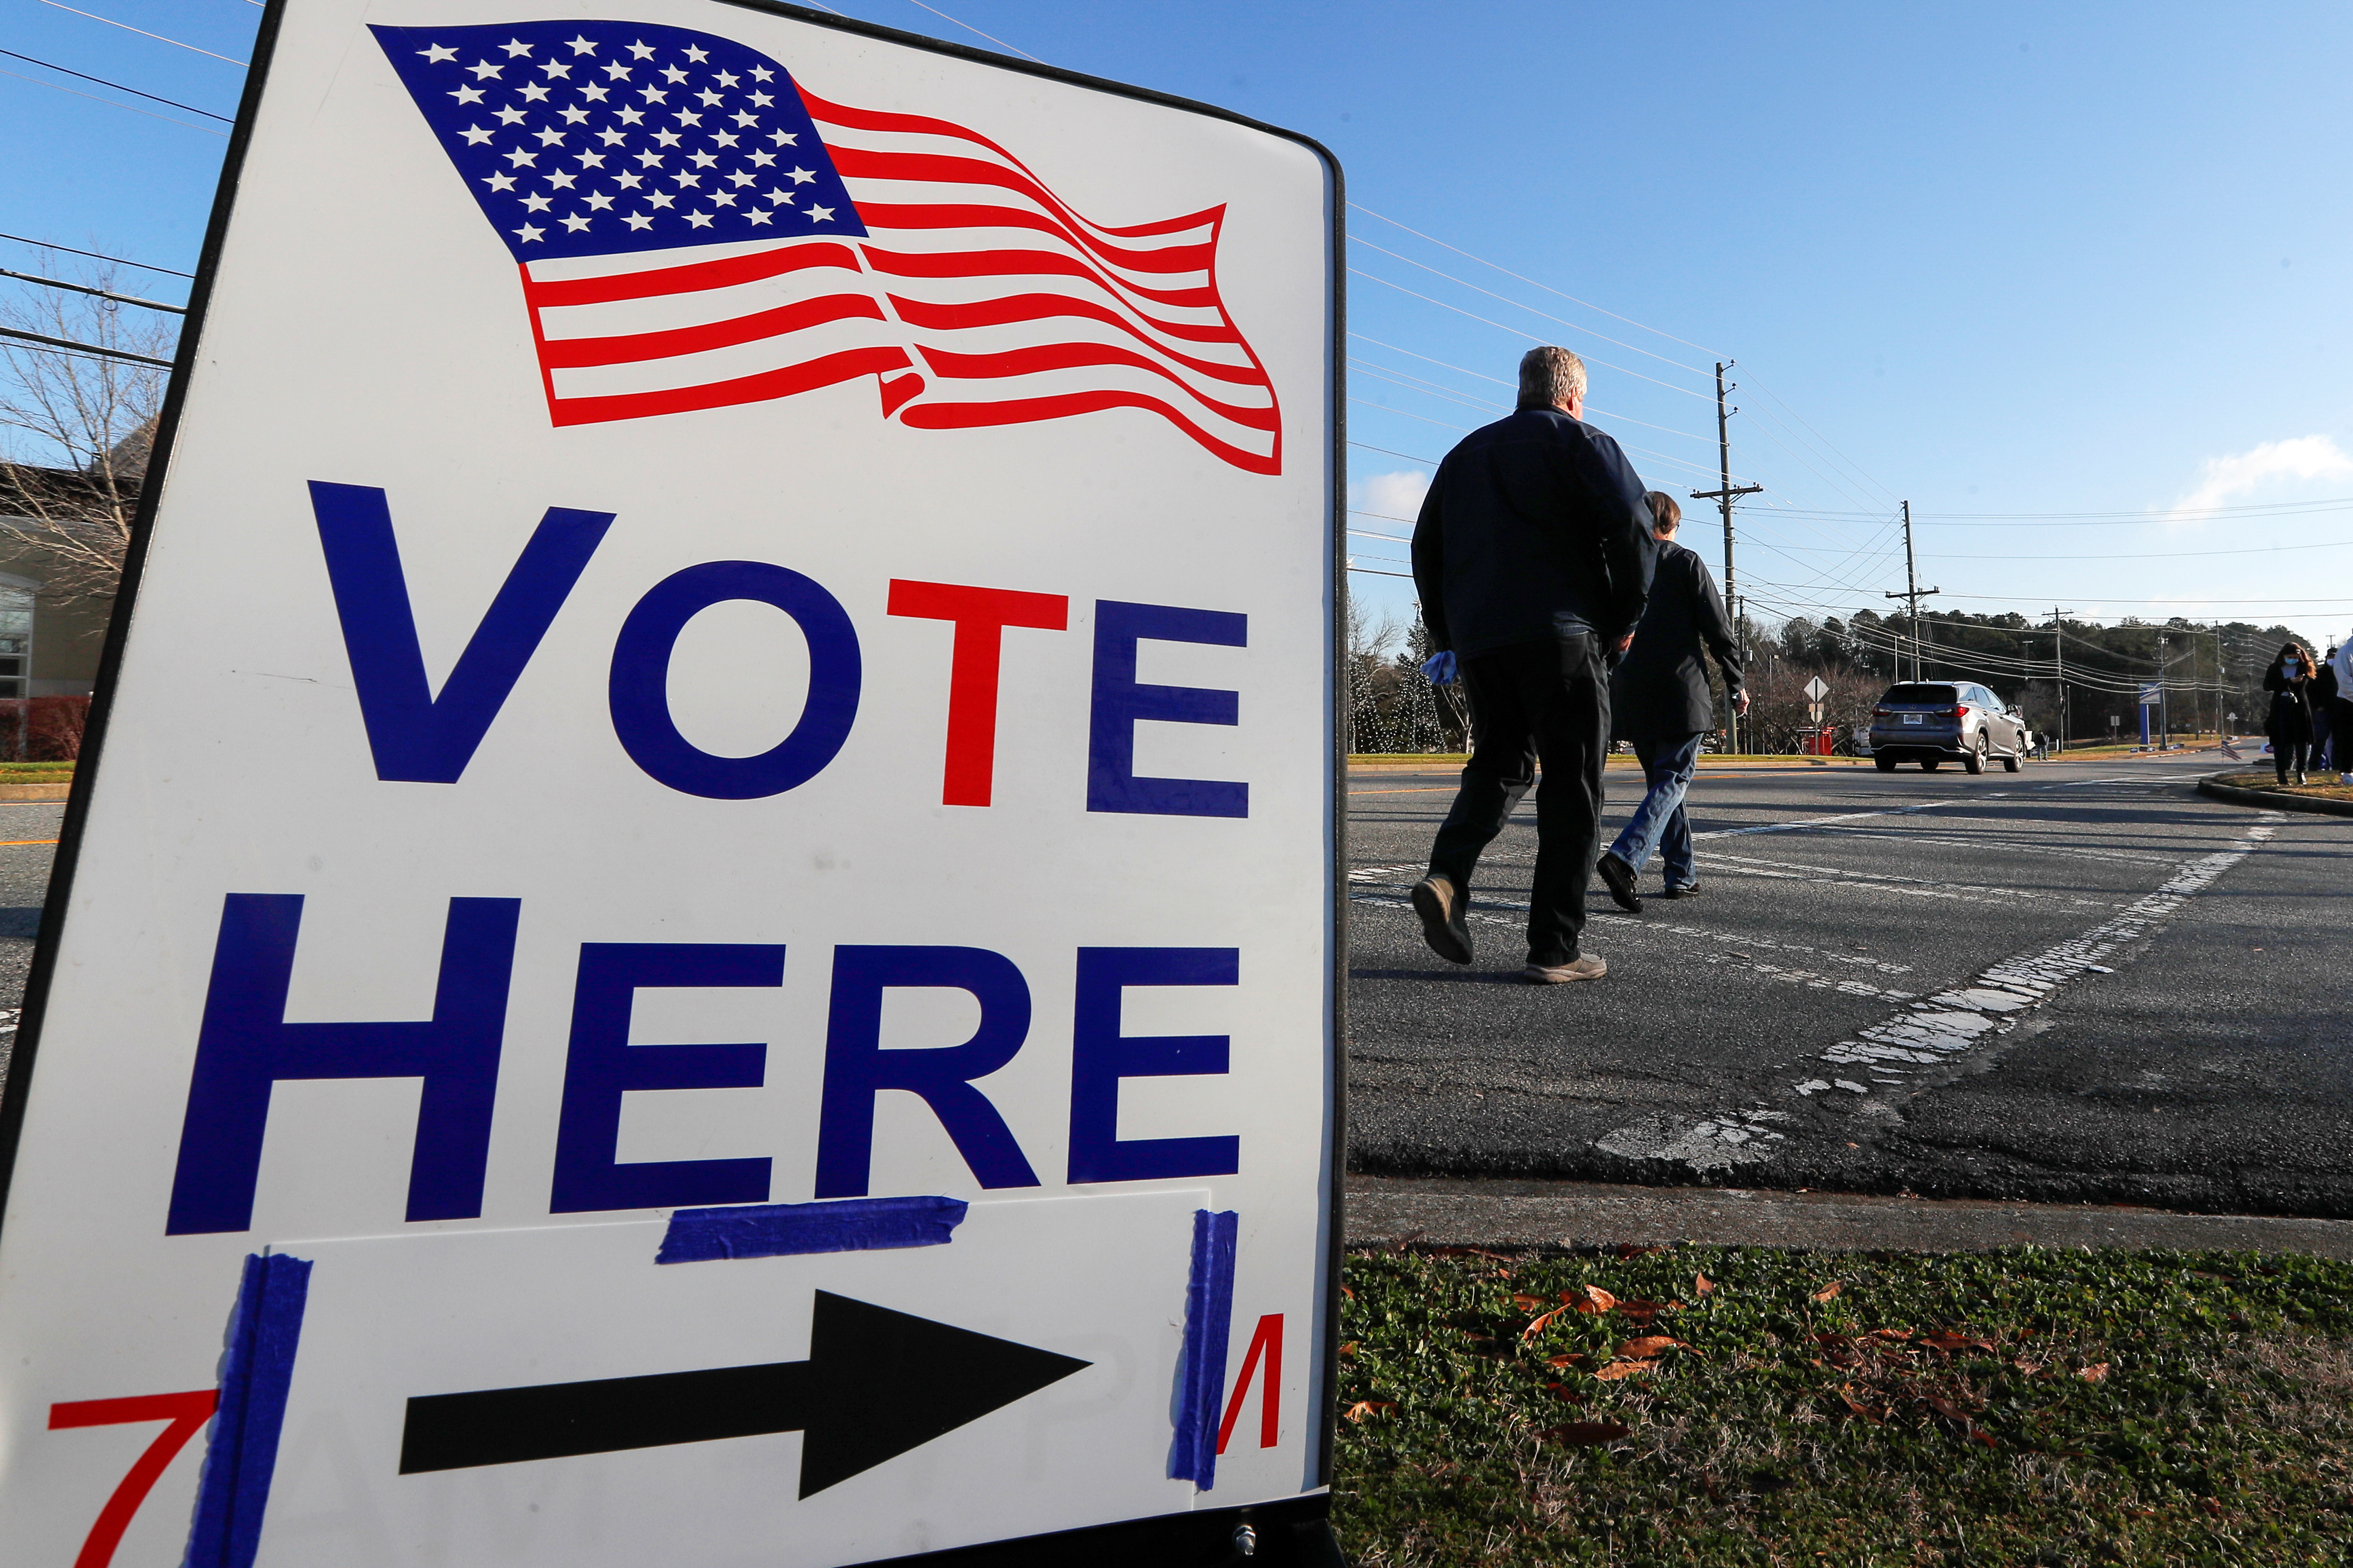 A sign is seen as voters line up for the U.S. Senate run-off election, at a polling location in Marietta, Georgia, U.S., January 5, 2021. REUTERS/Mike Segar/File Photo